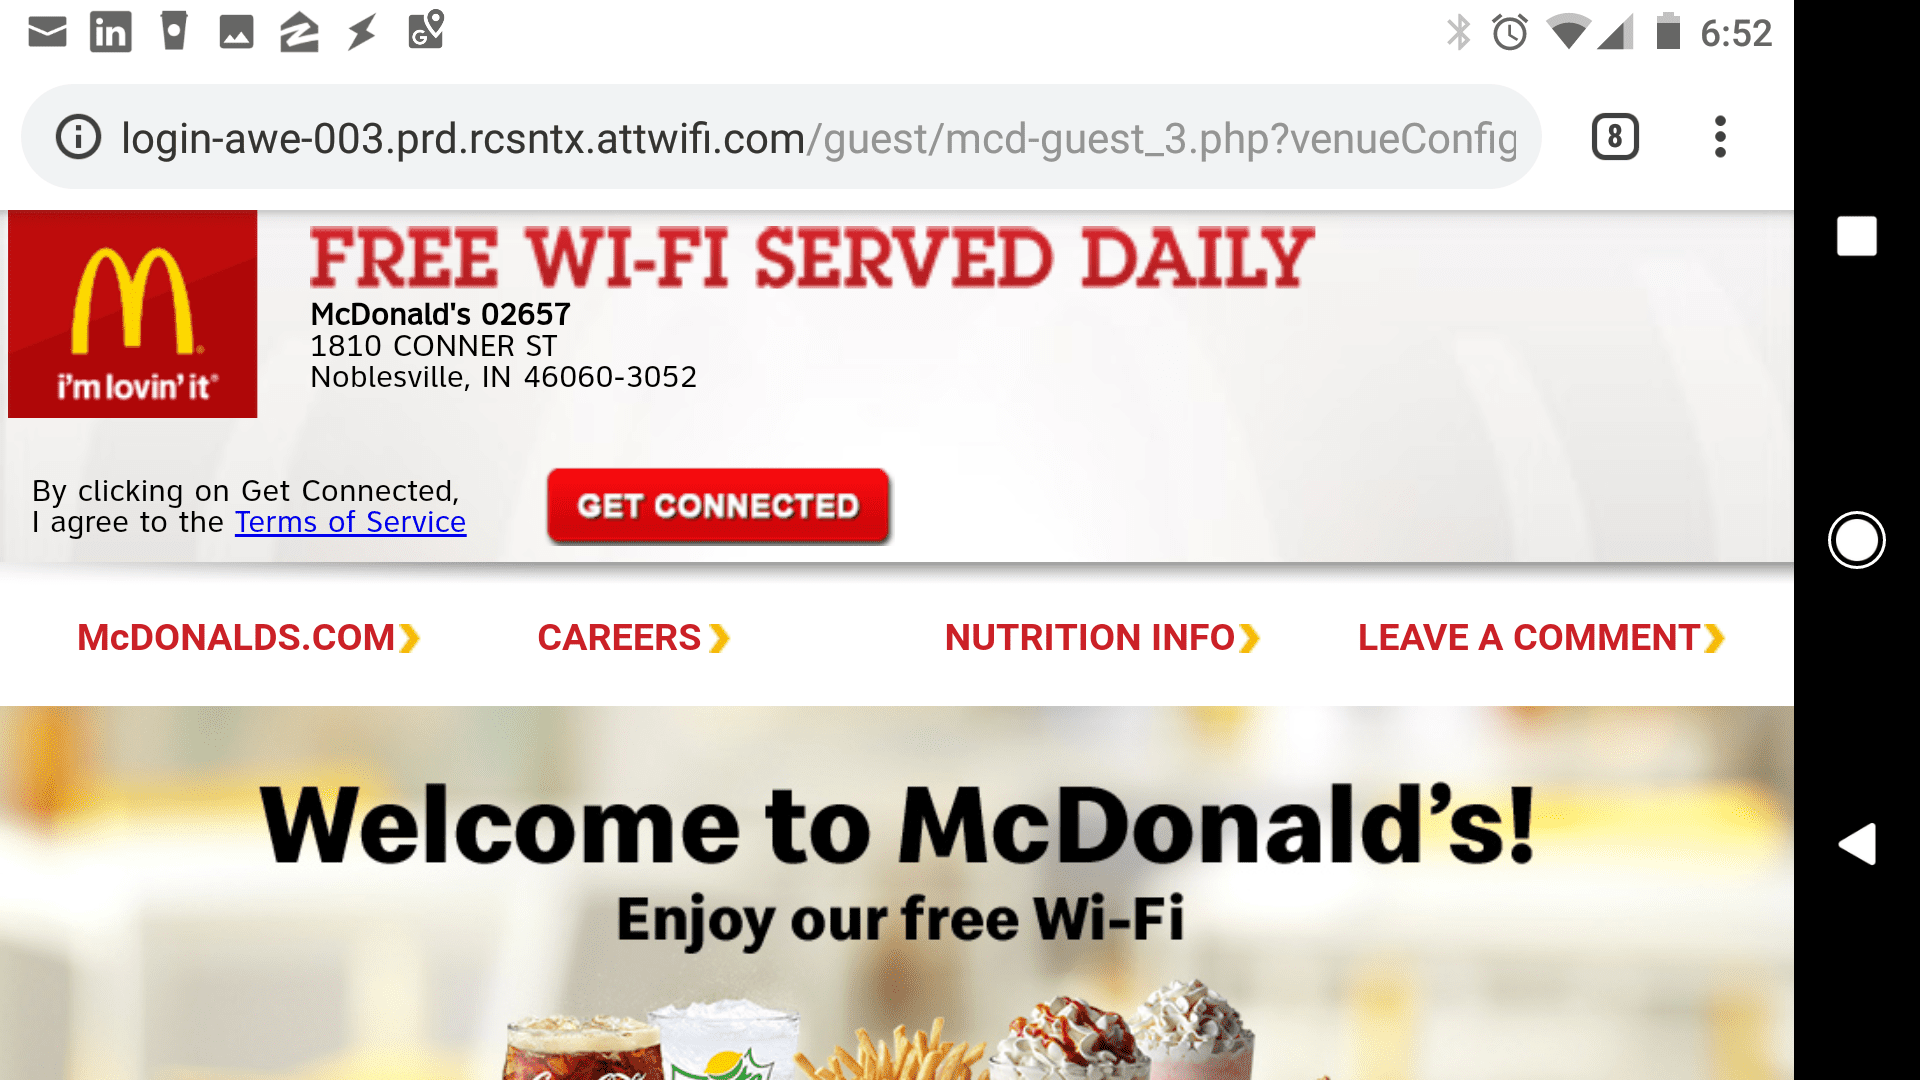 McDonald's mobile wi-fi connection page